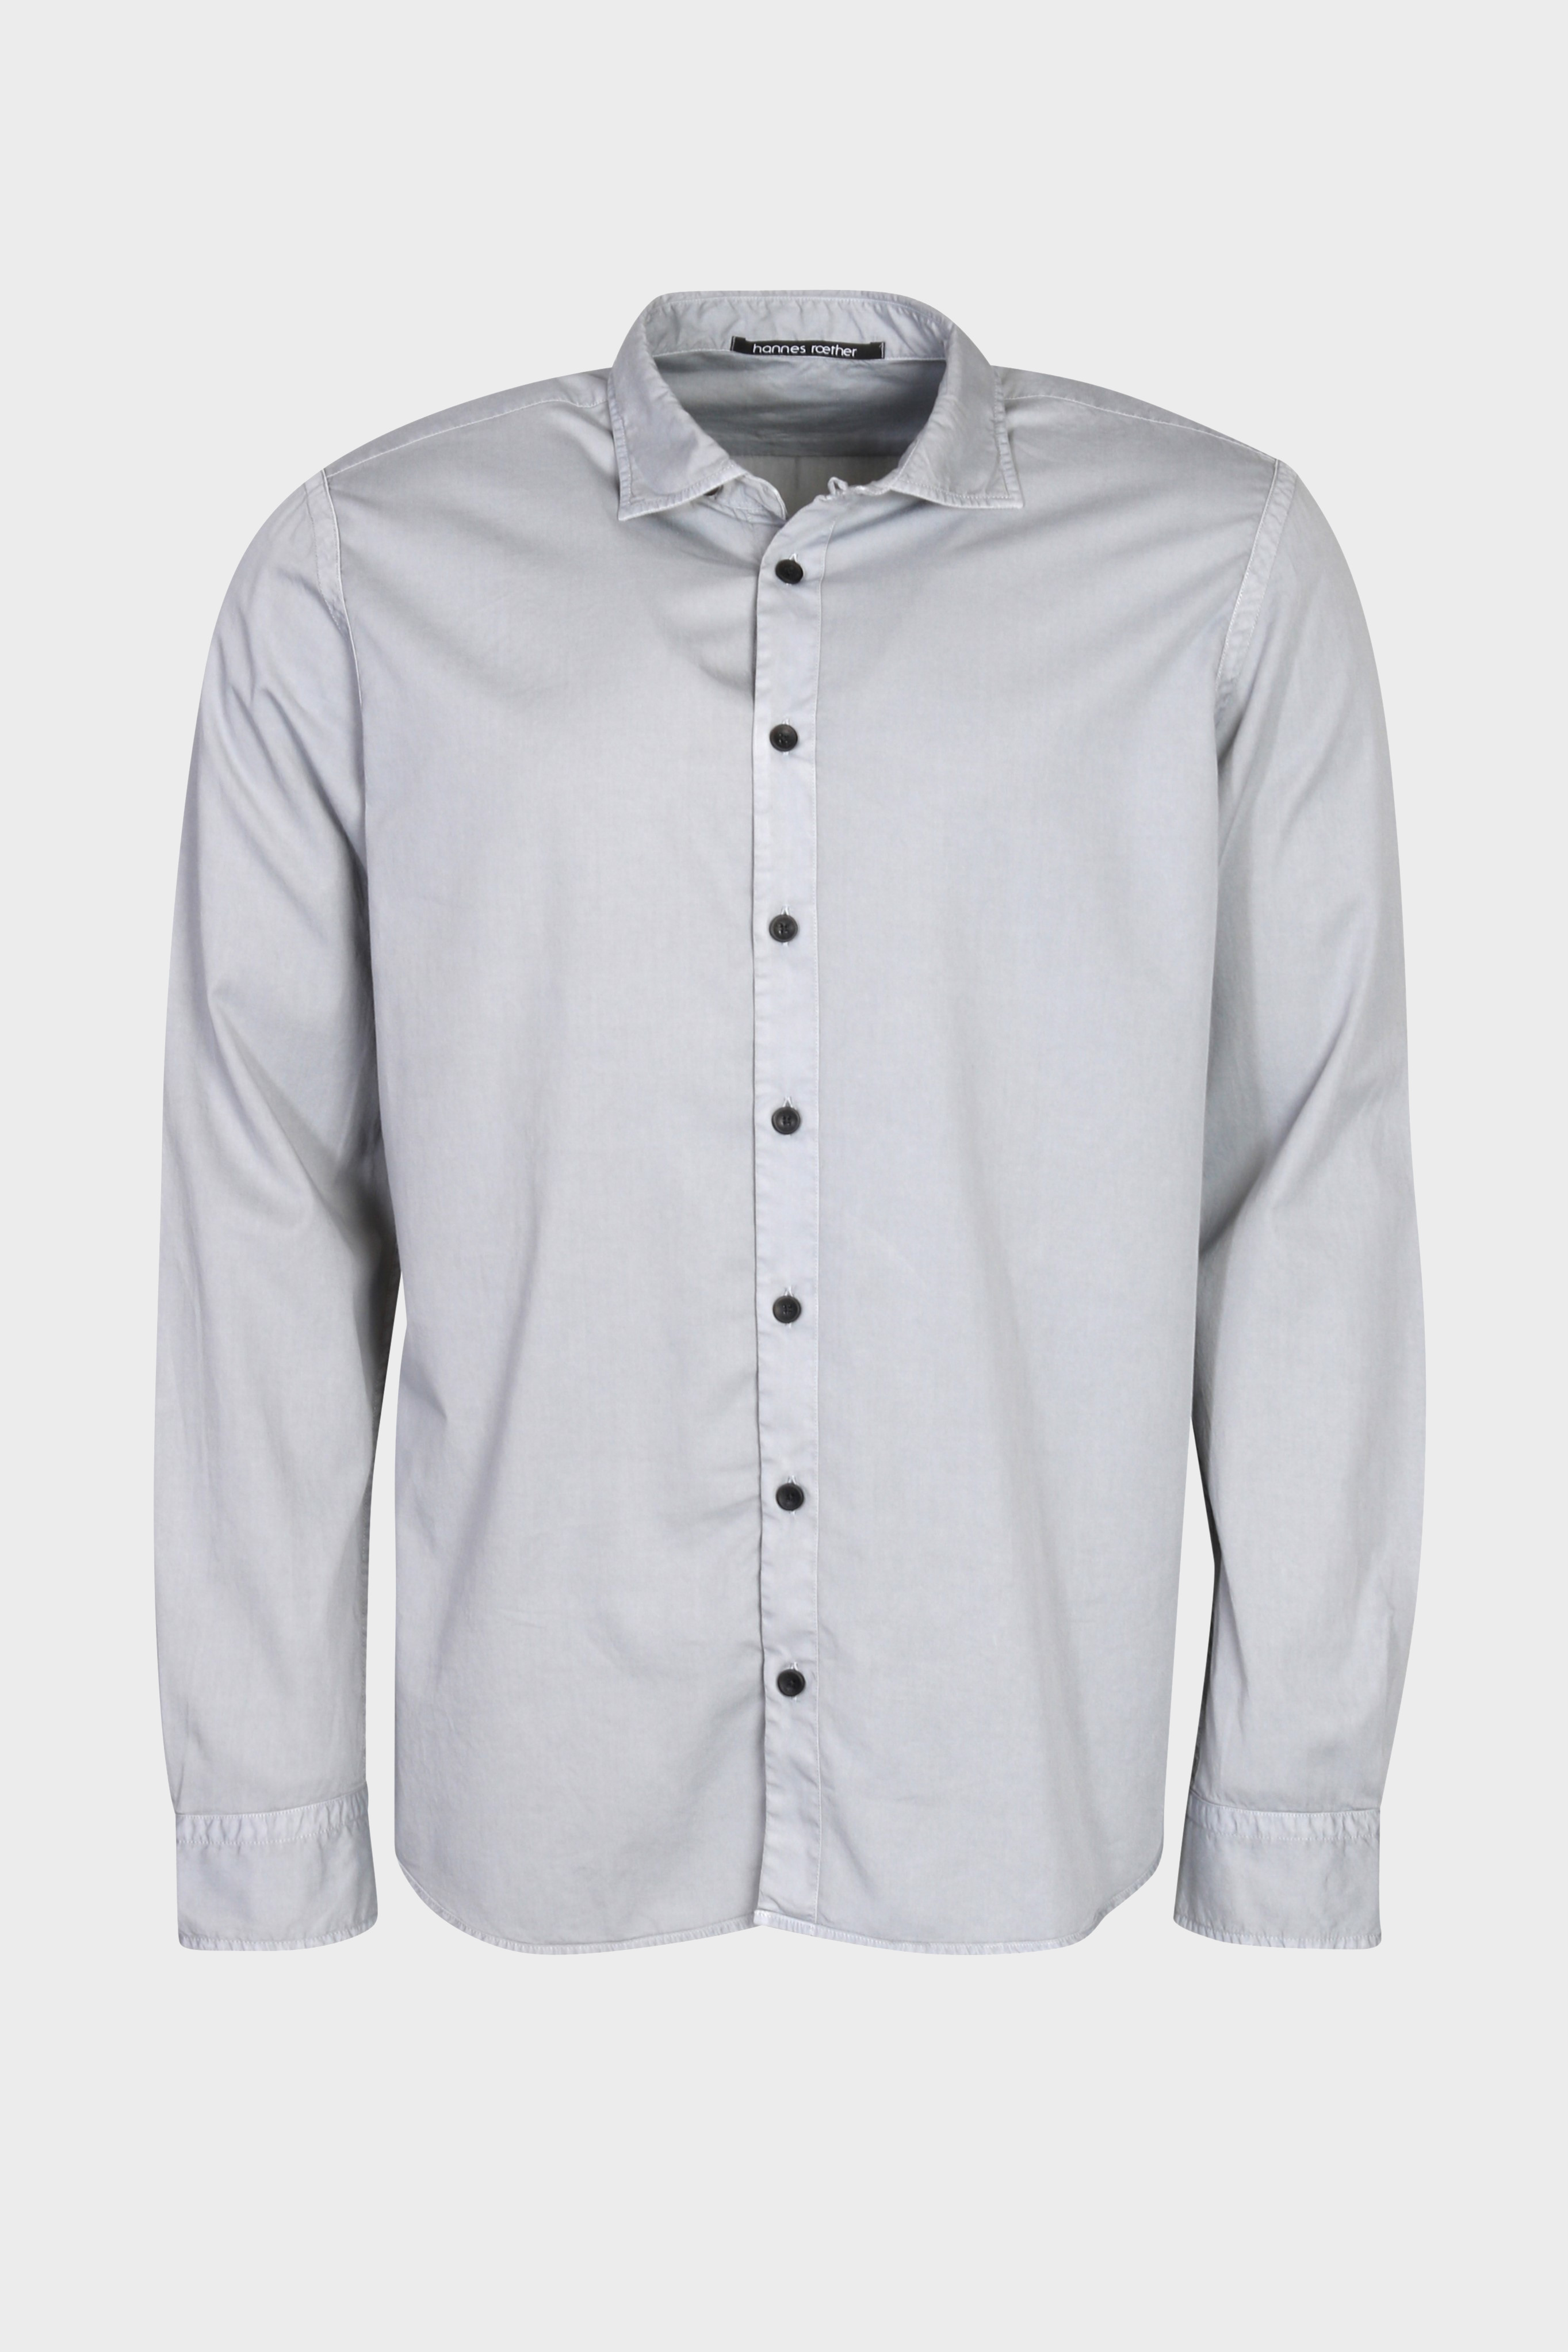 HANNES ROETHER Cotton Shirt in Light Grey L